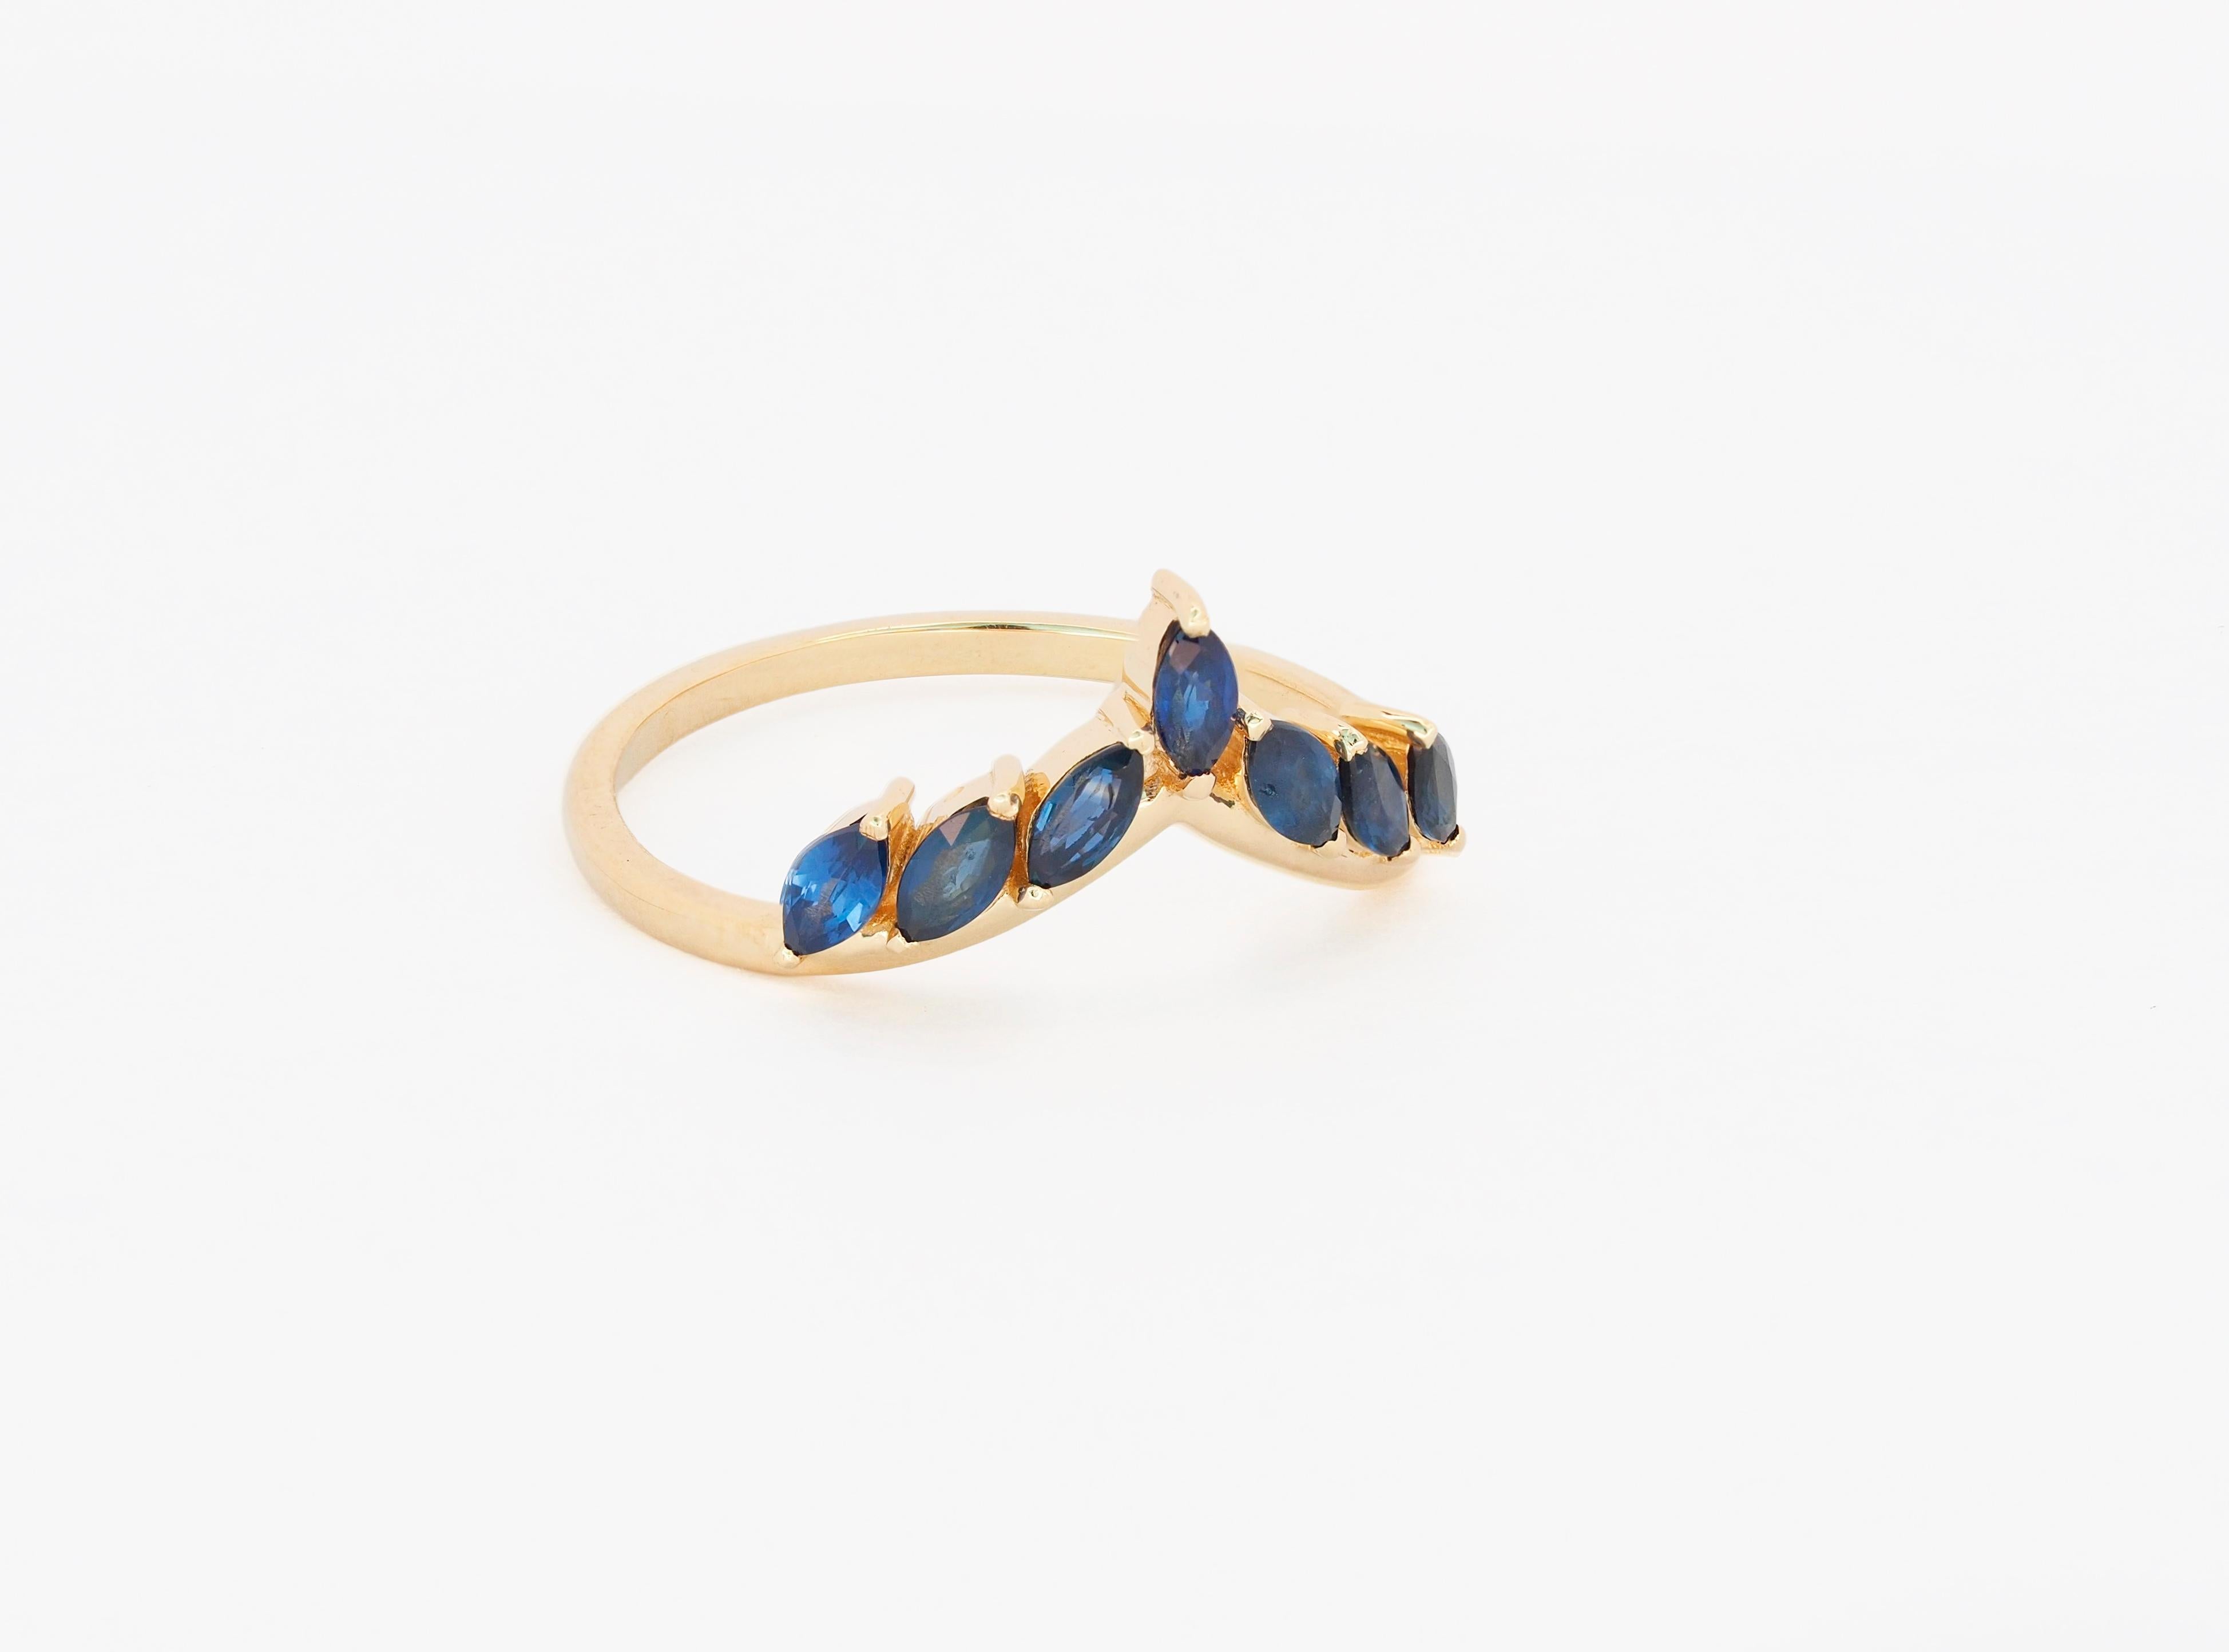 Marquise Cut Sapphire Tiara 14k gold ring.  For Sale